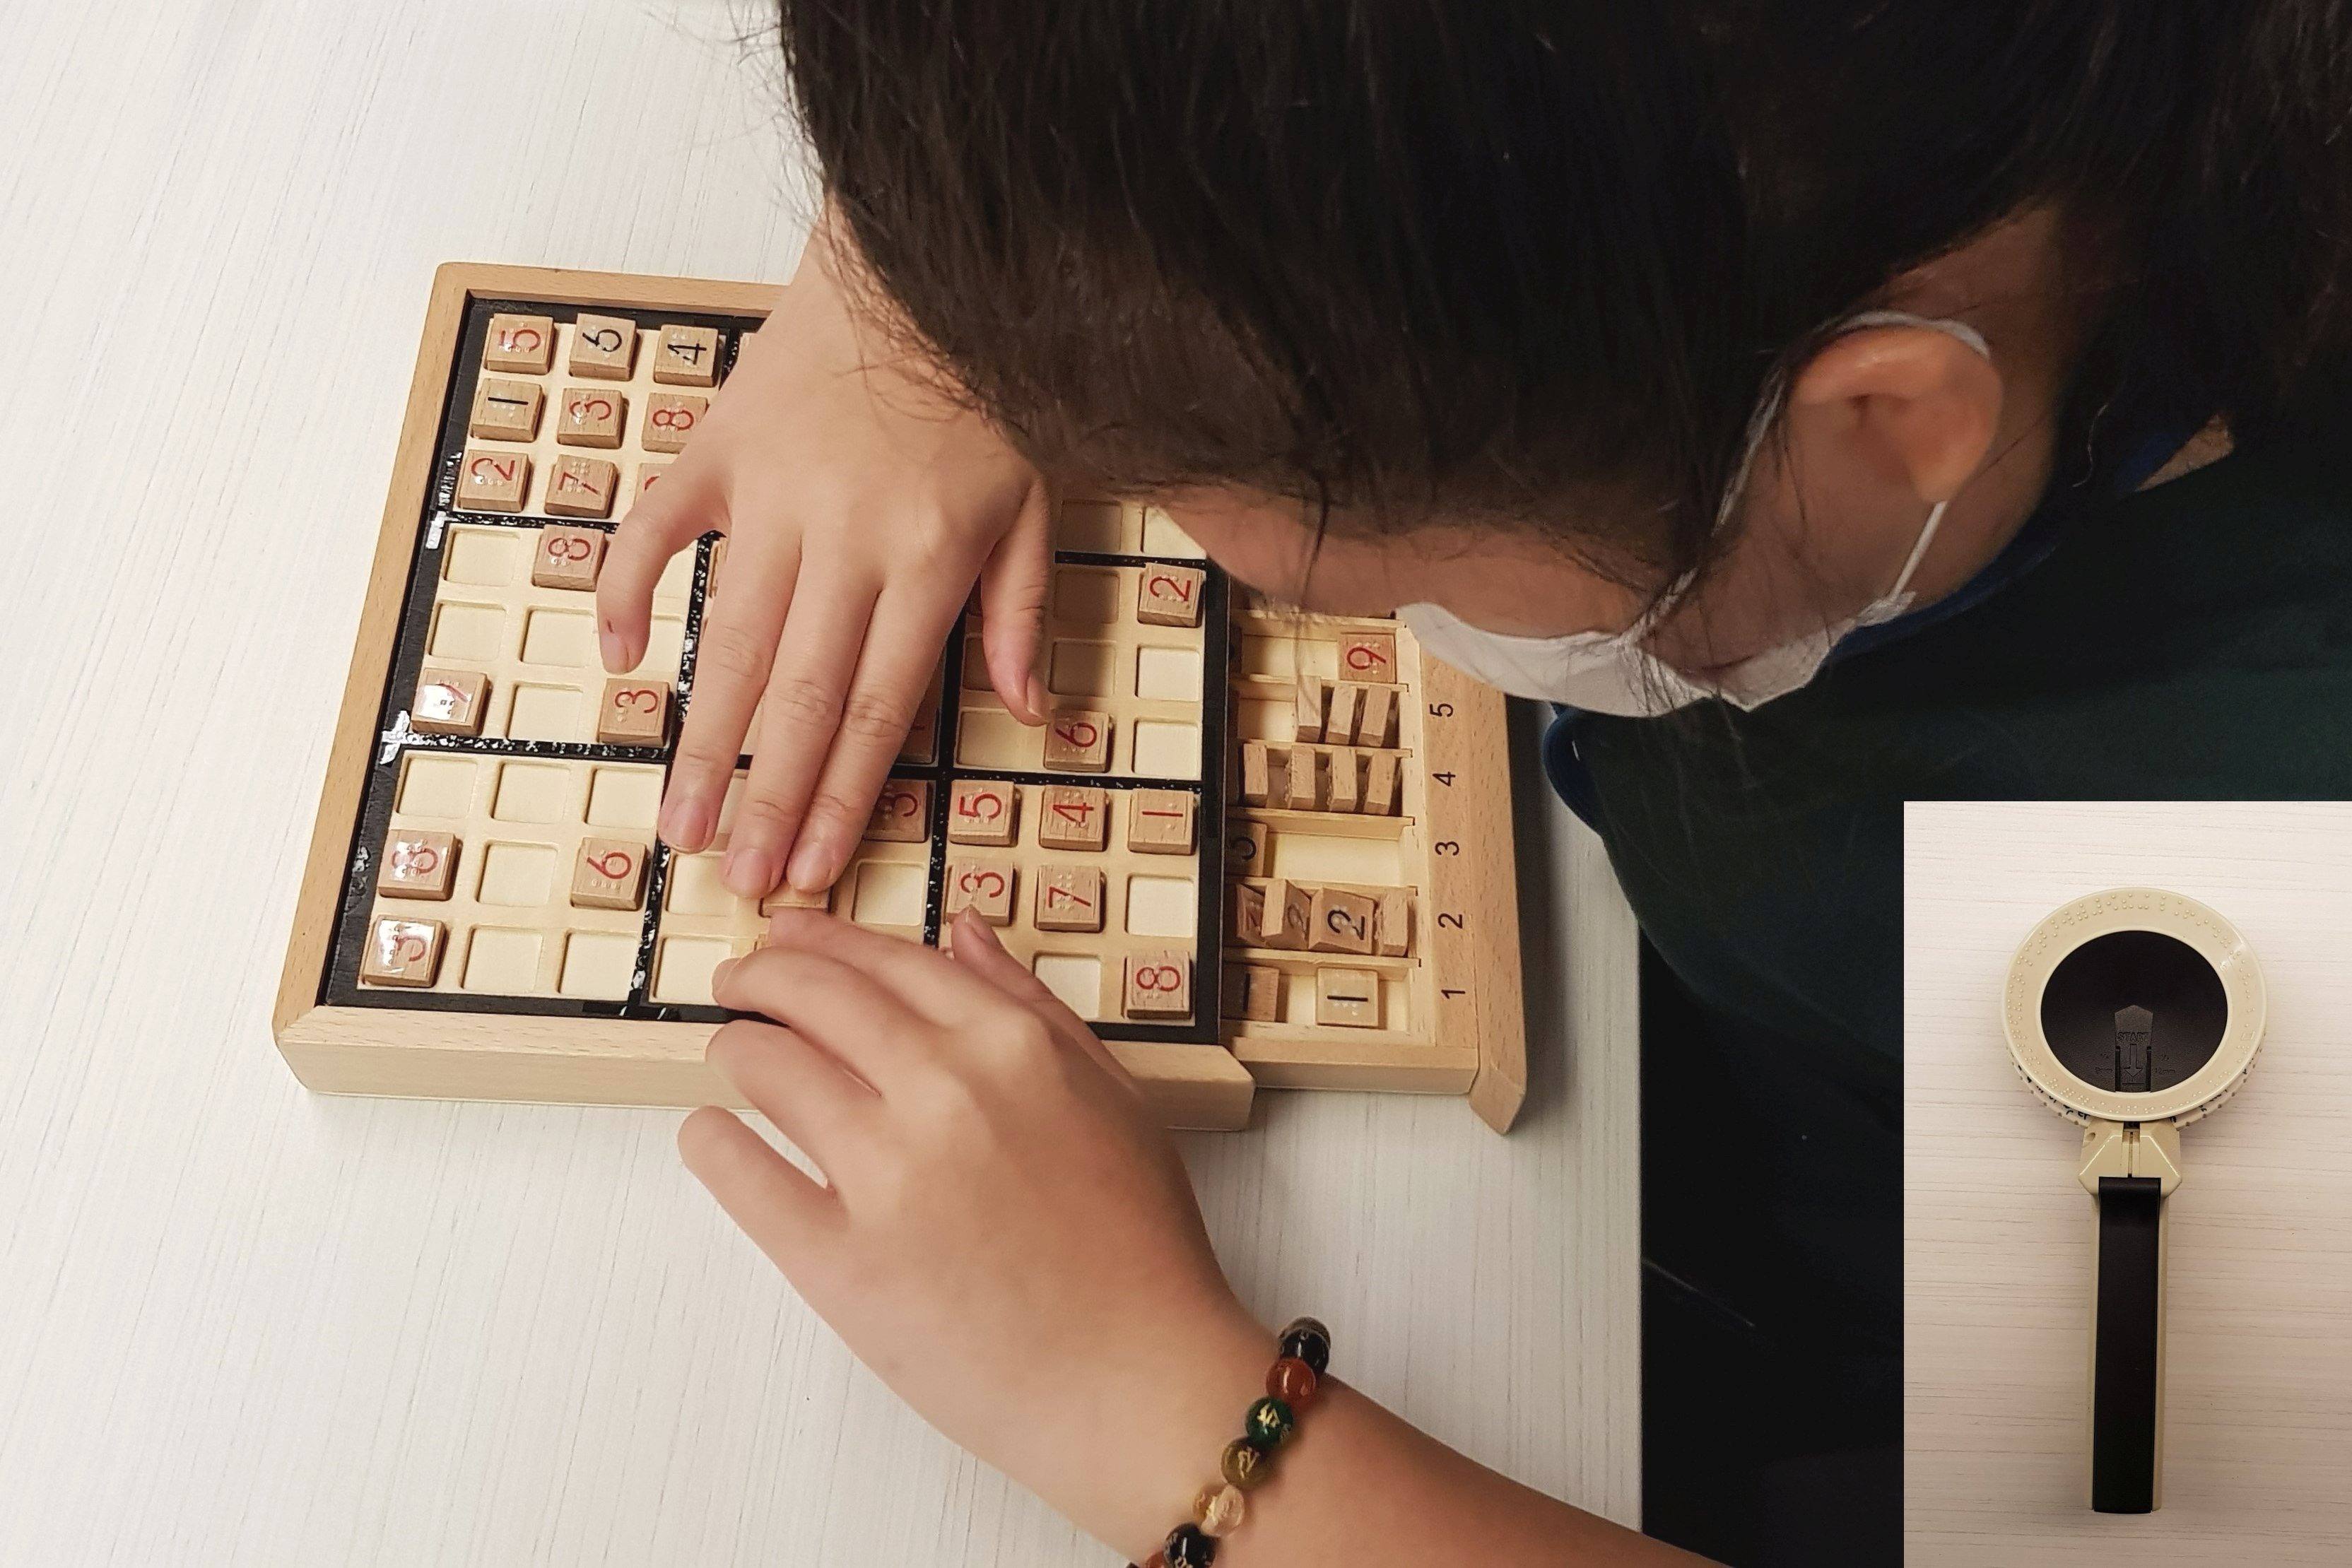 Photo of Siew Ling attempting to solve the Sudoku with the Wooden Sudoku set with drawer, and feeling the braille labelled on one of the number tiles.